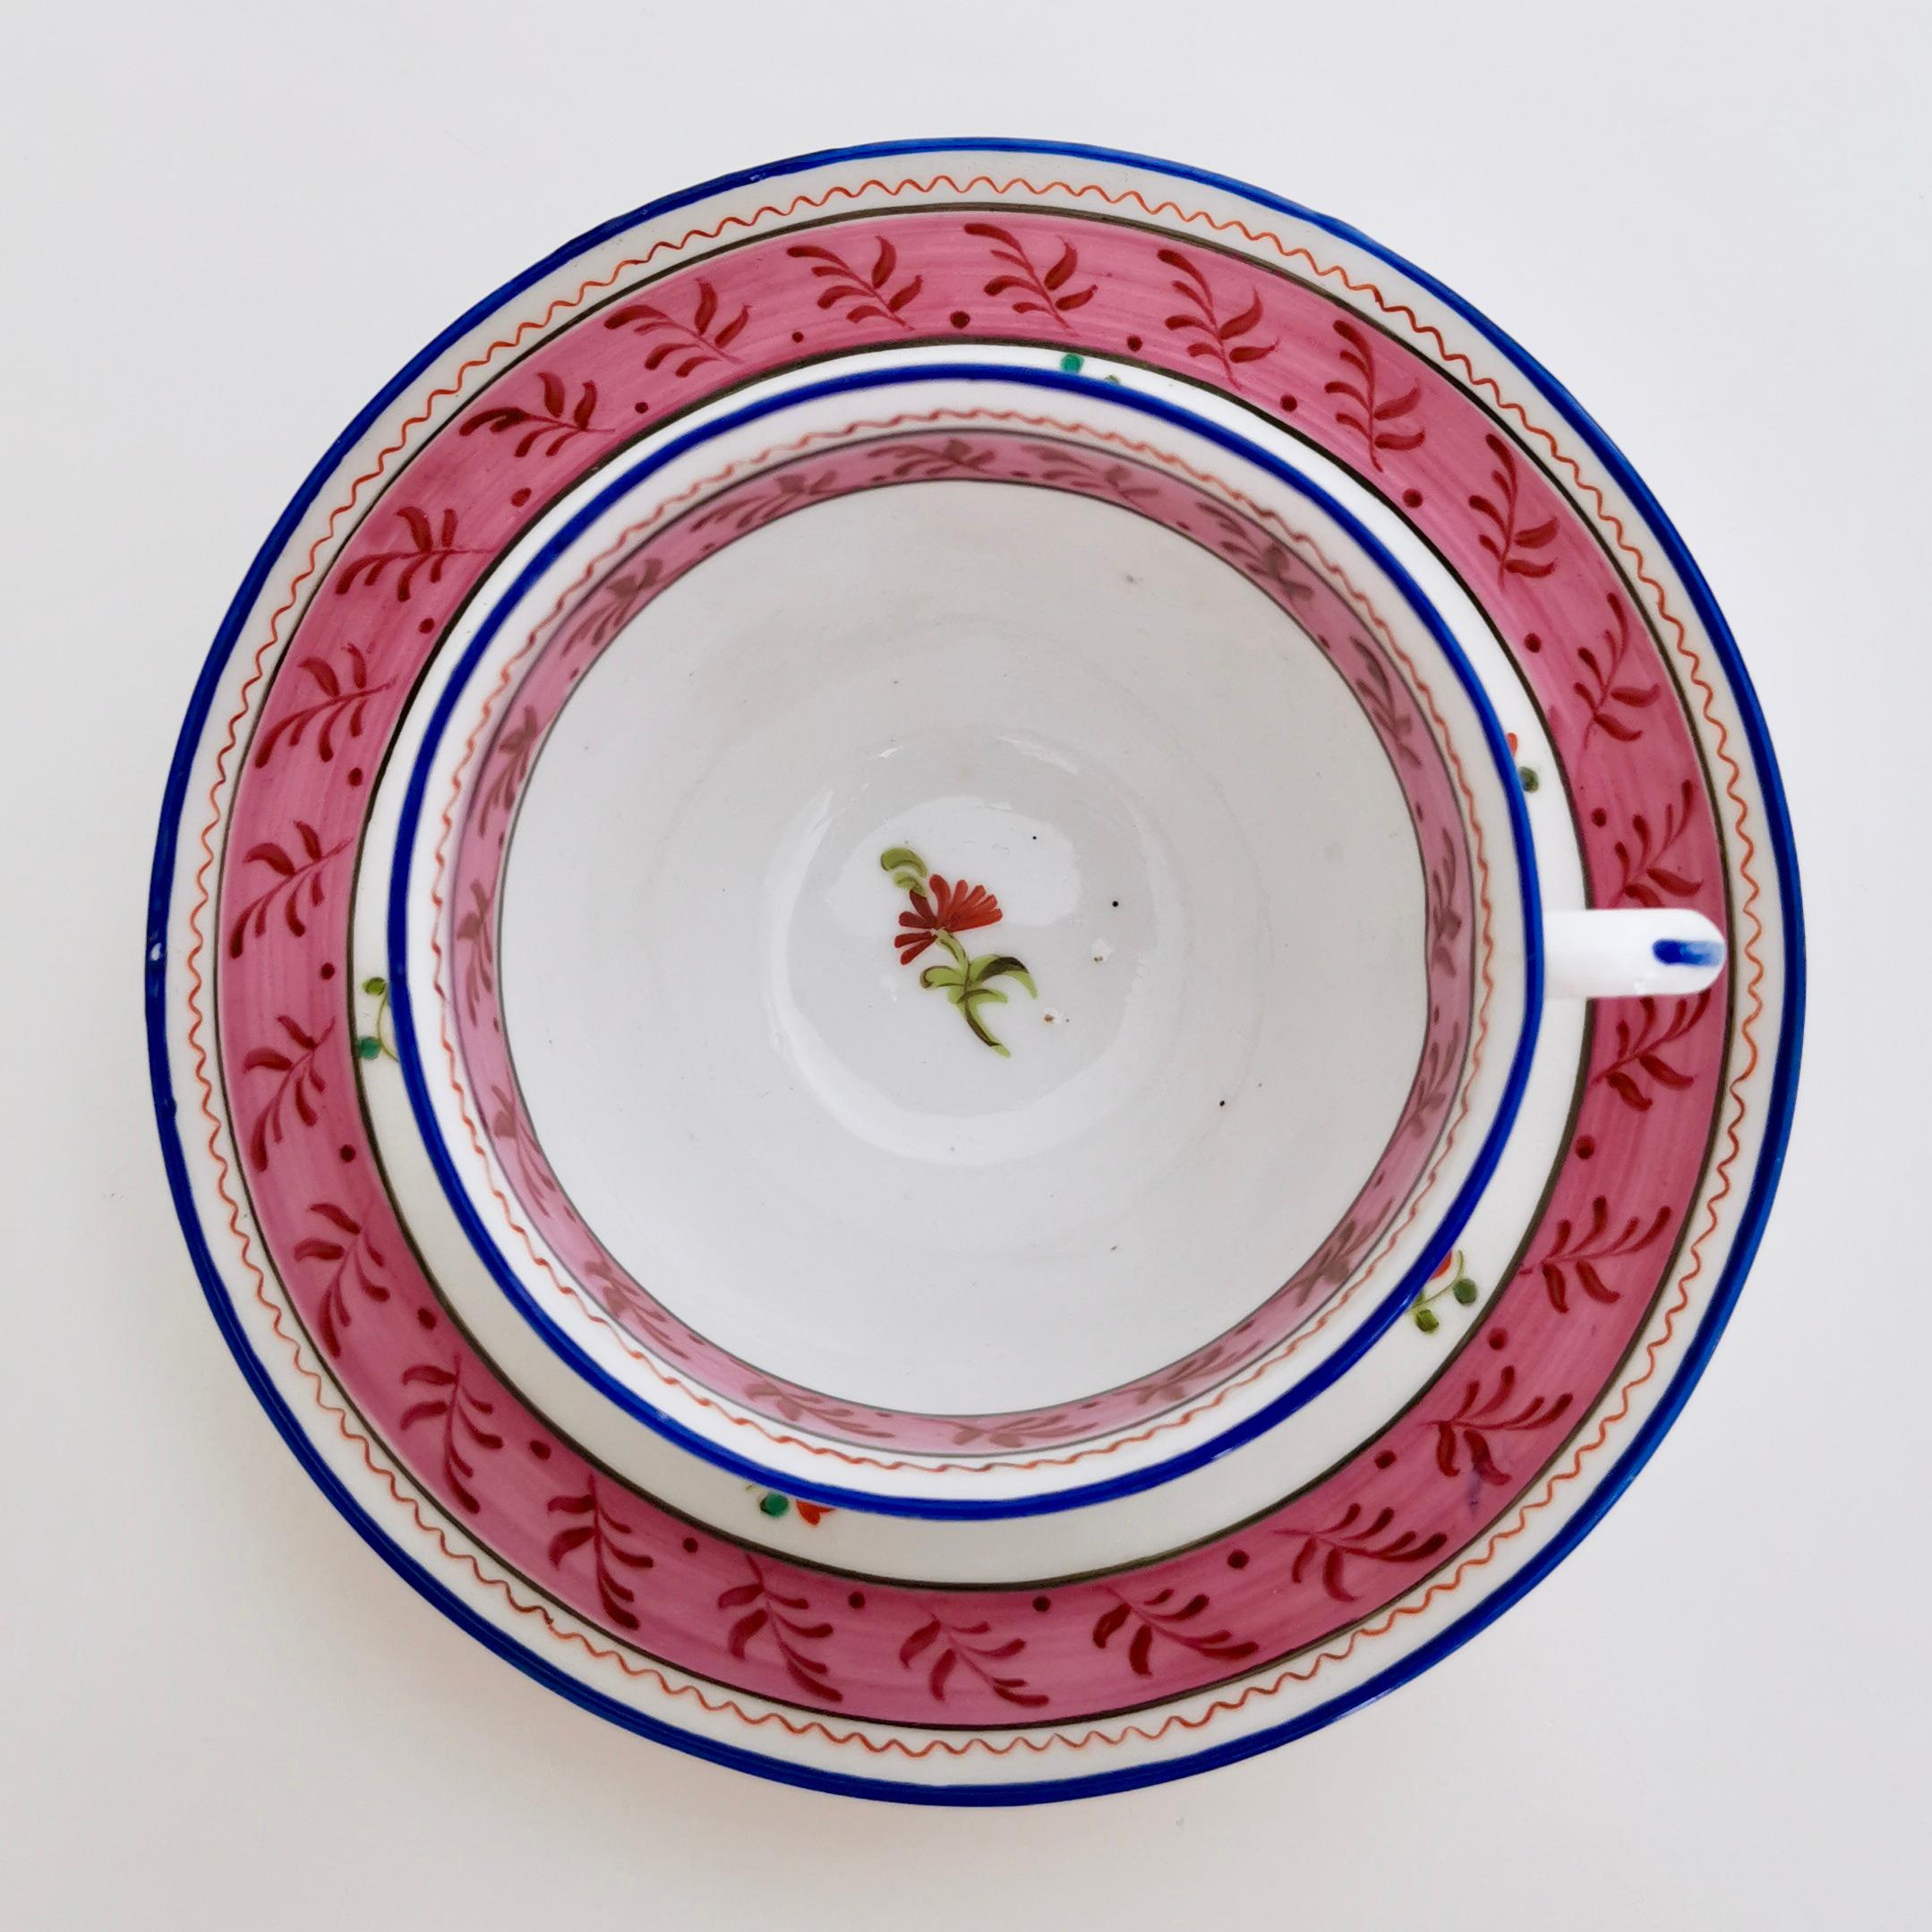 New Hall Porcelain Teacup, Hybrid Paste, Flowers Patt, 1180, circa 1815 In Good Condition In London, GB